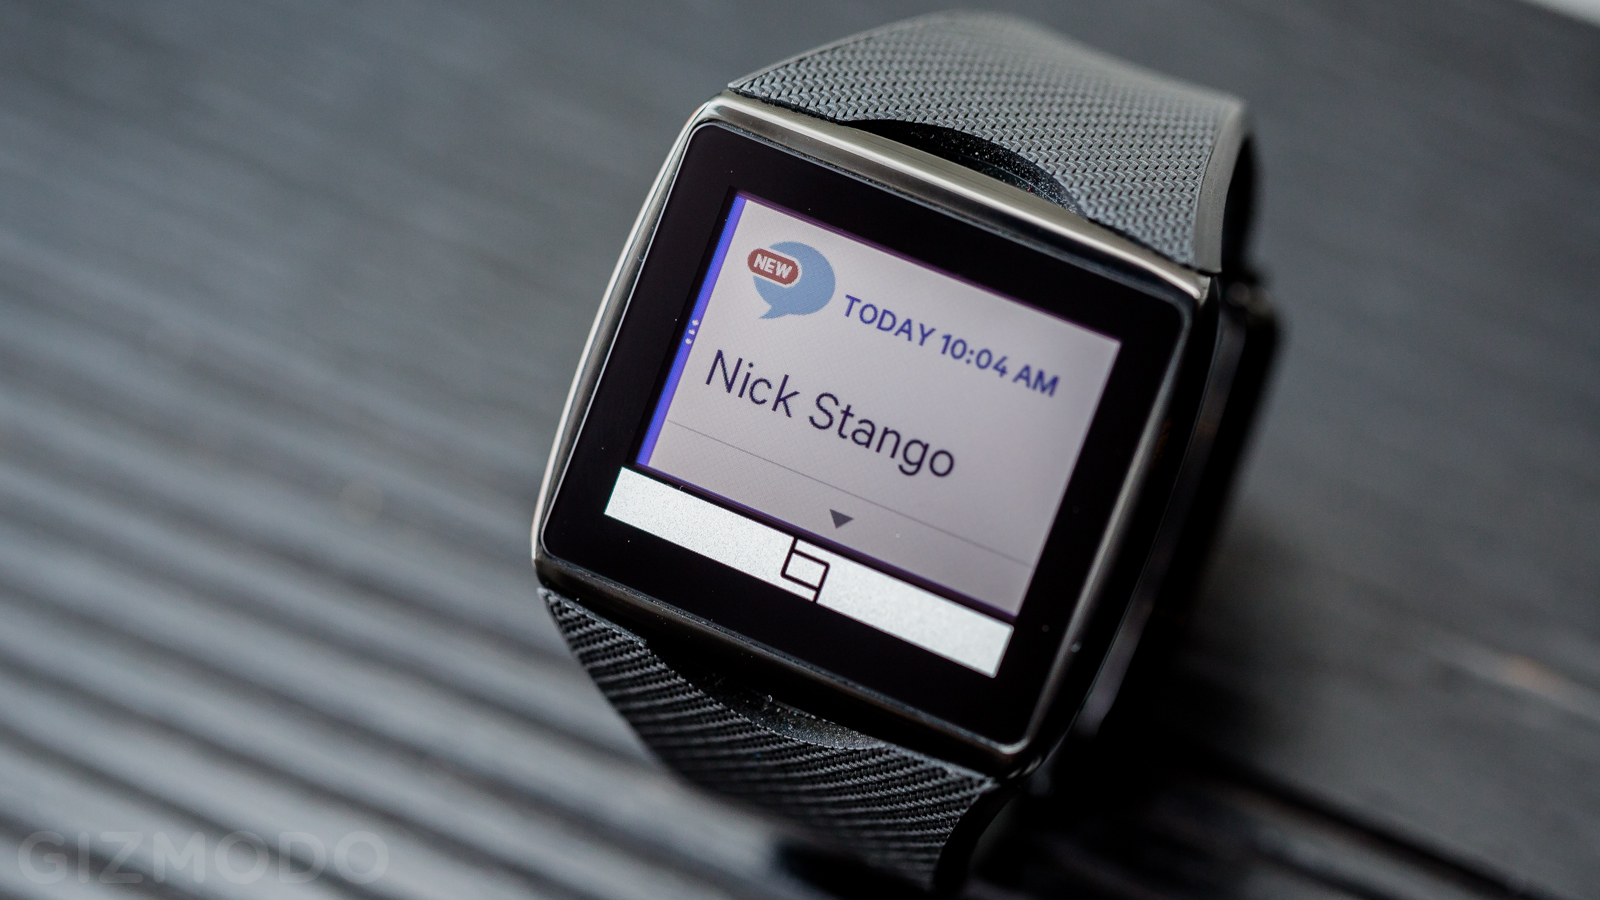 Qualcomm Toq Review: Still Not Time For A Smartwatch